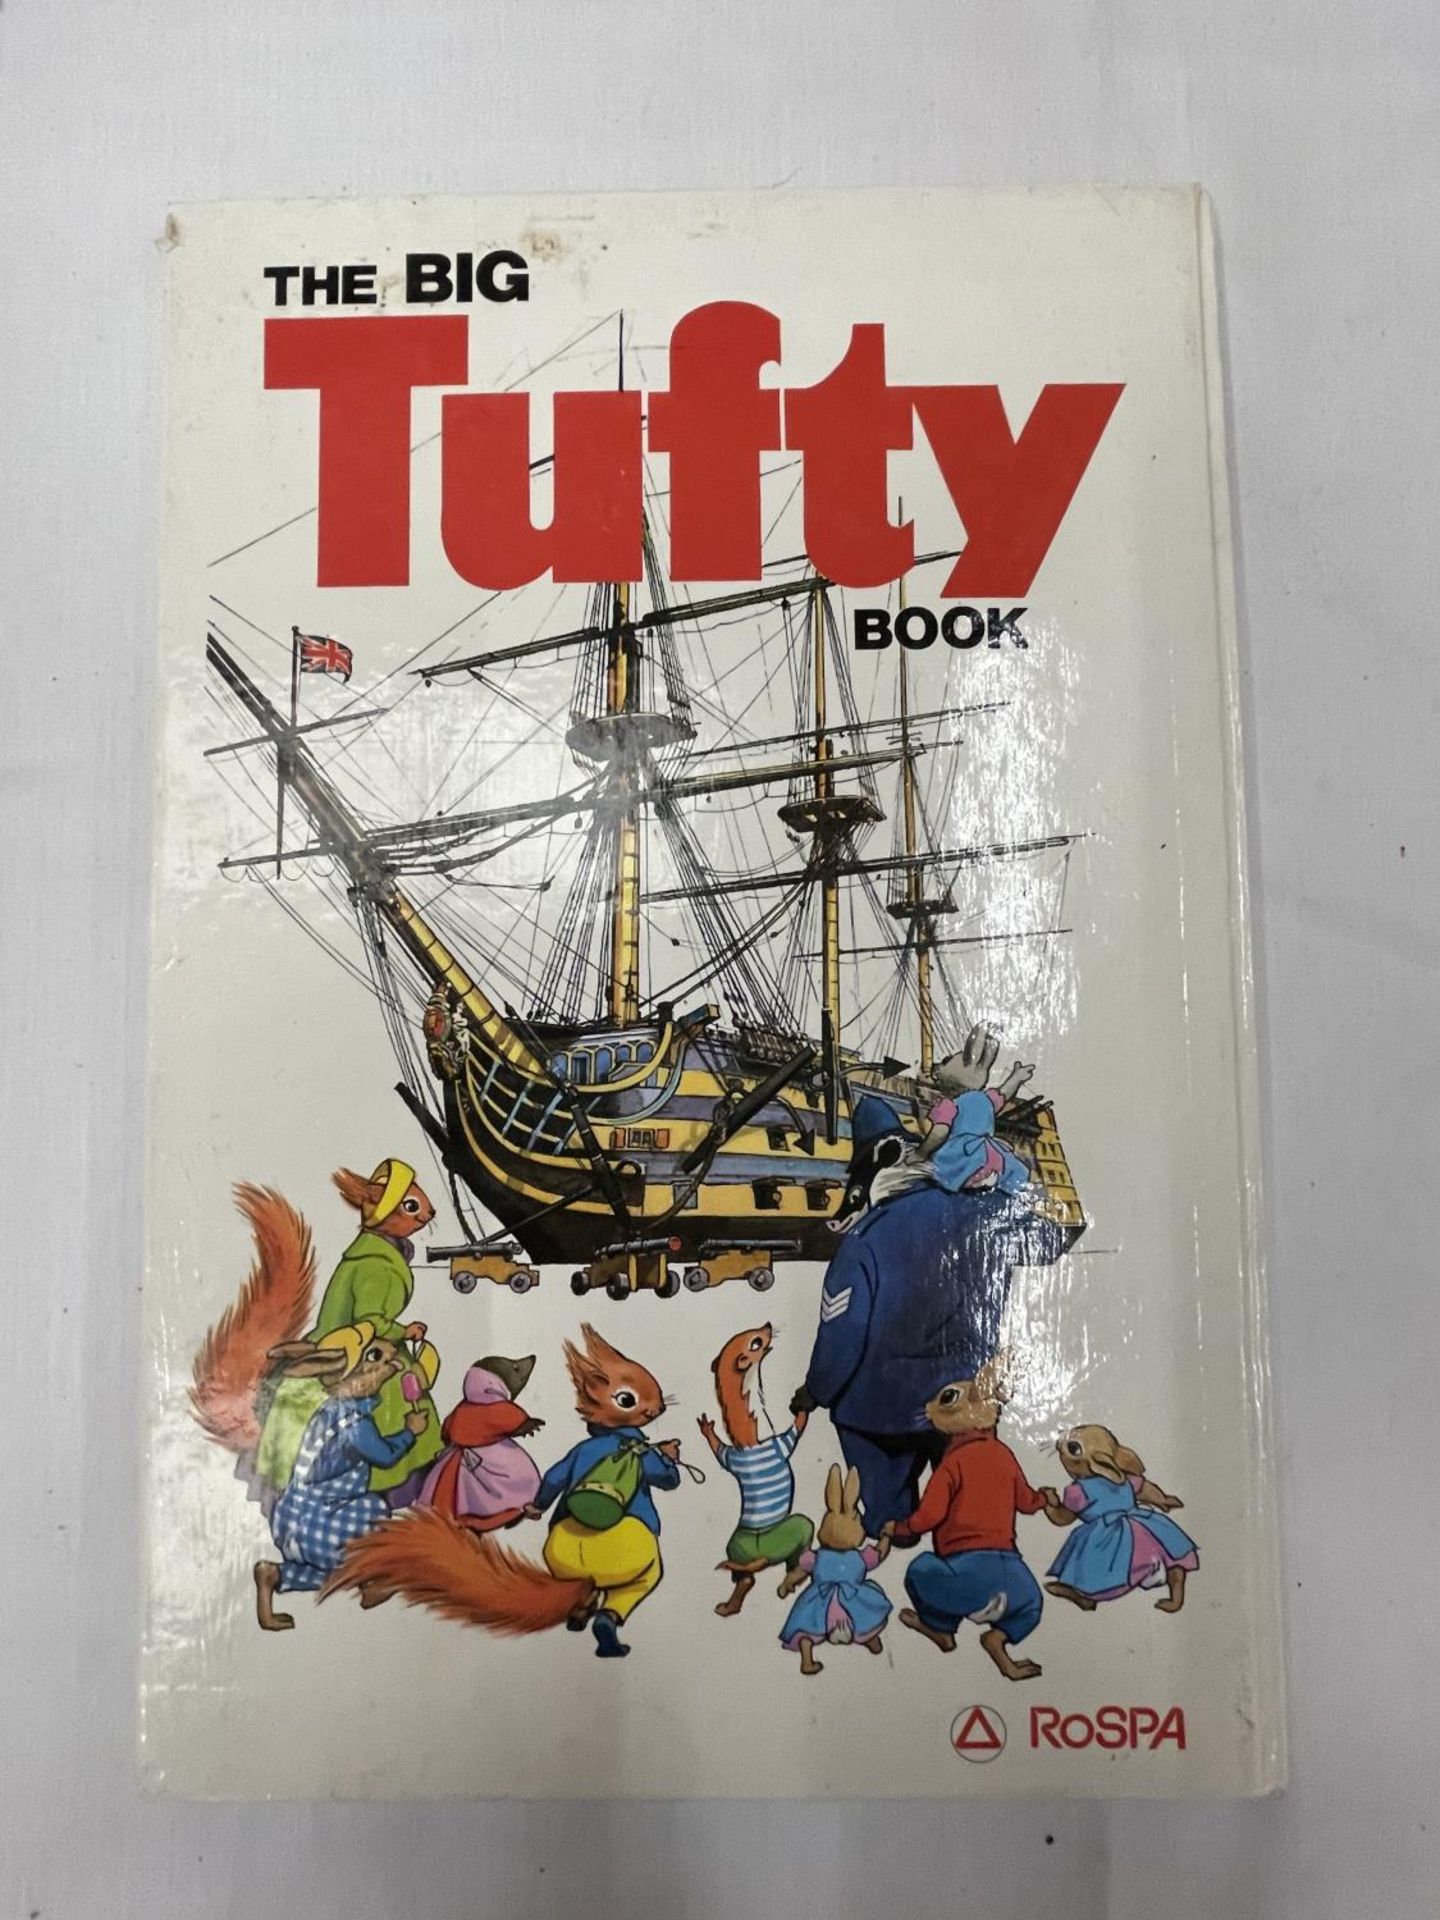 THE BIG TUFTY BOOK - Image 4 of 4